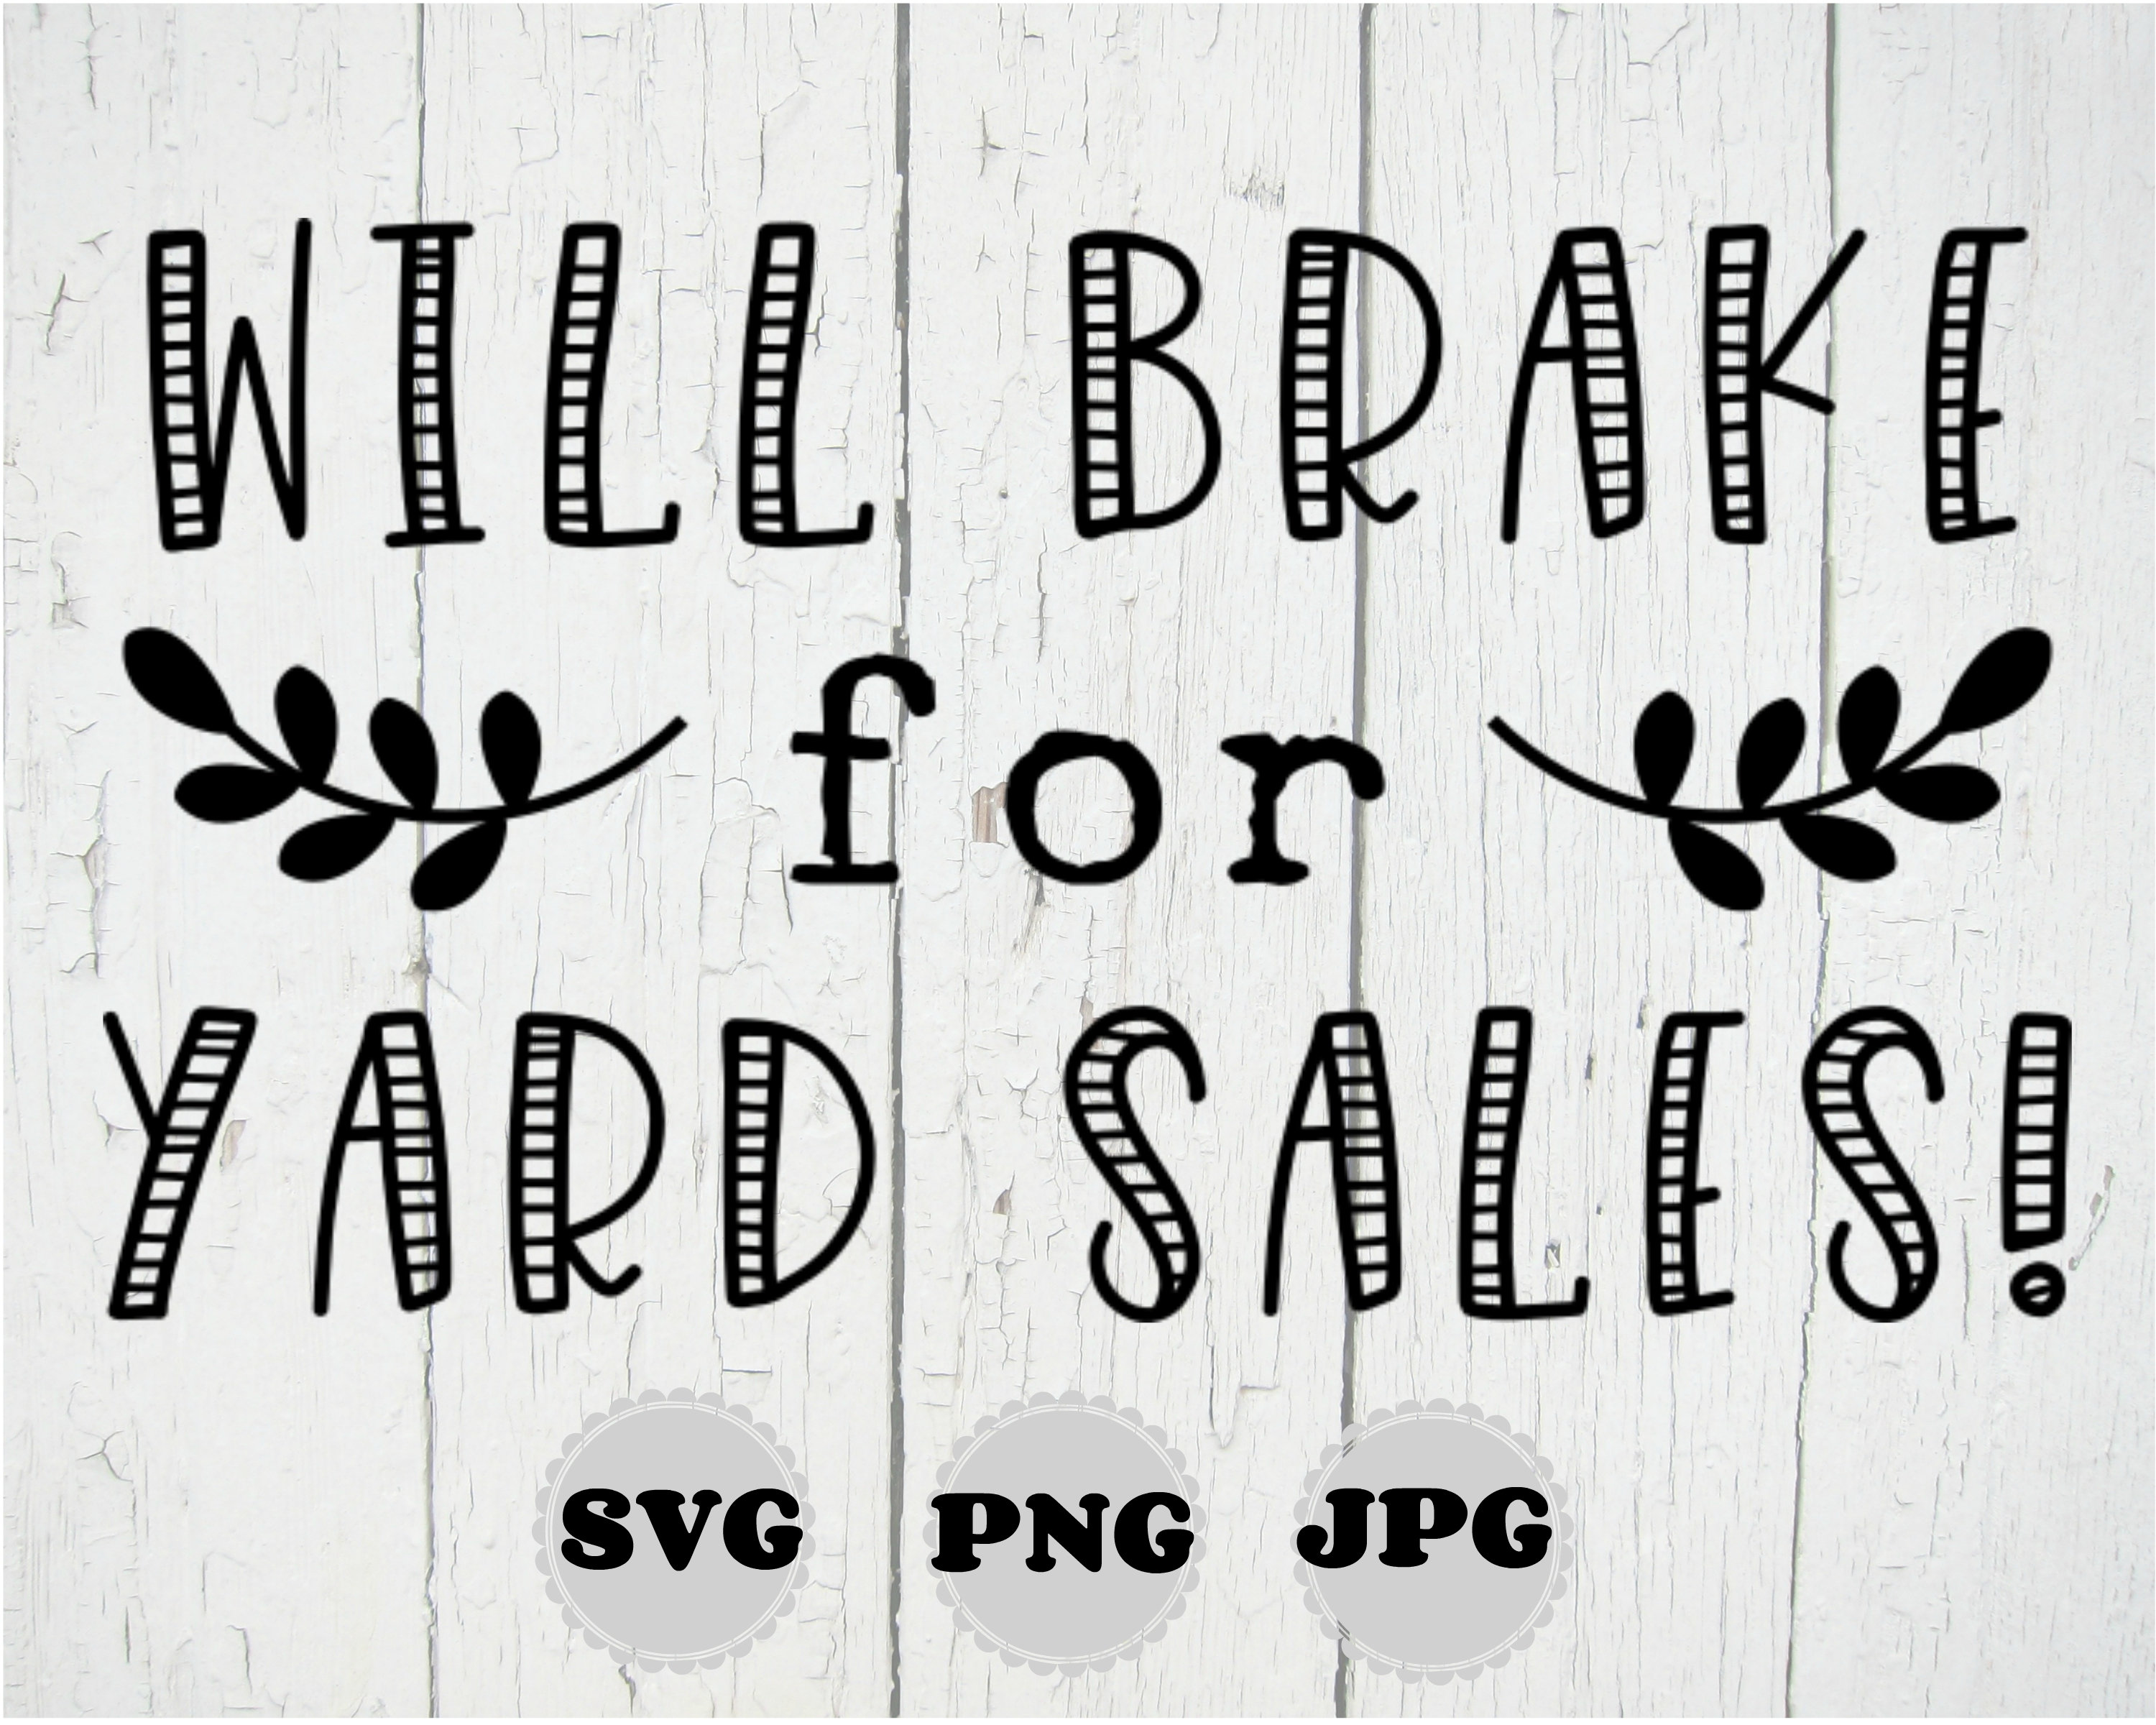 Will Brake For Yard Sales Svg File Cut File For Vinyl Decal Etsy